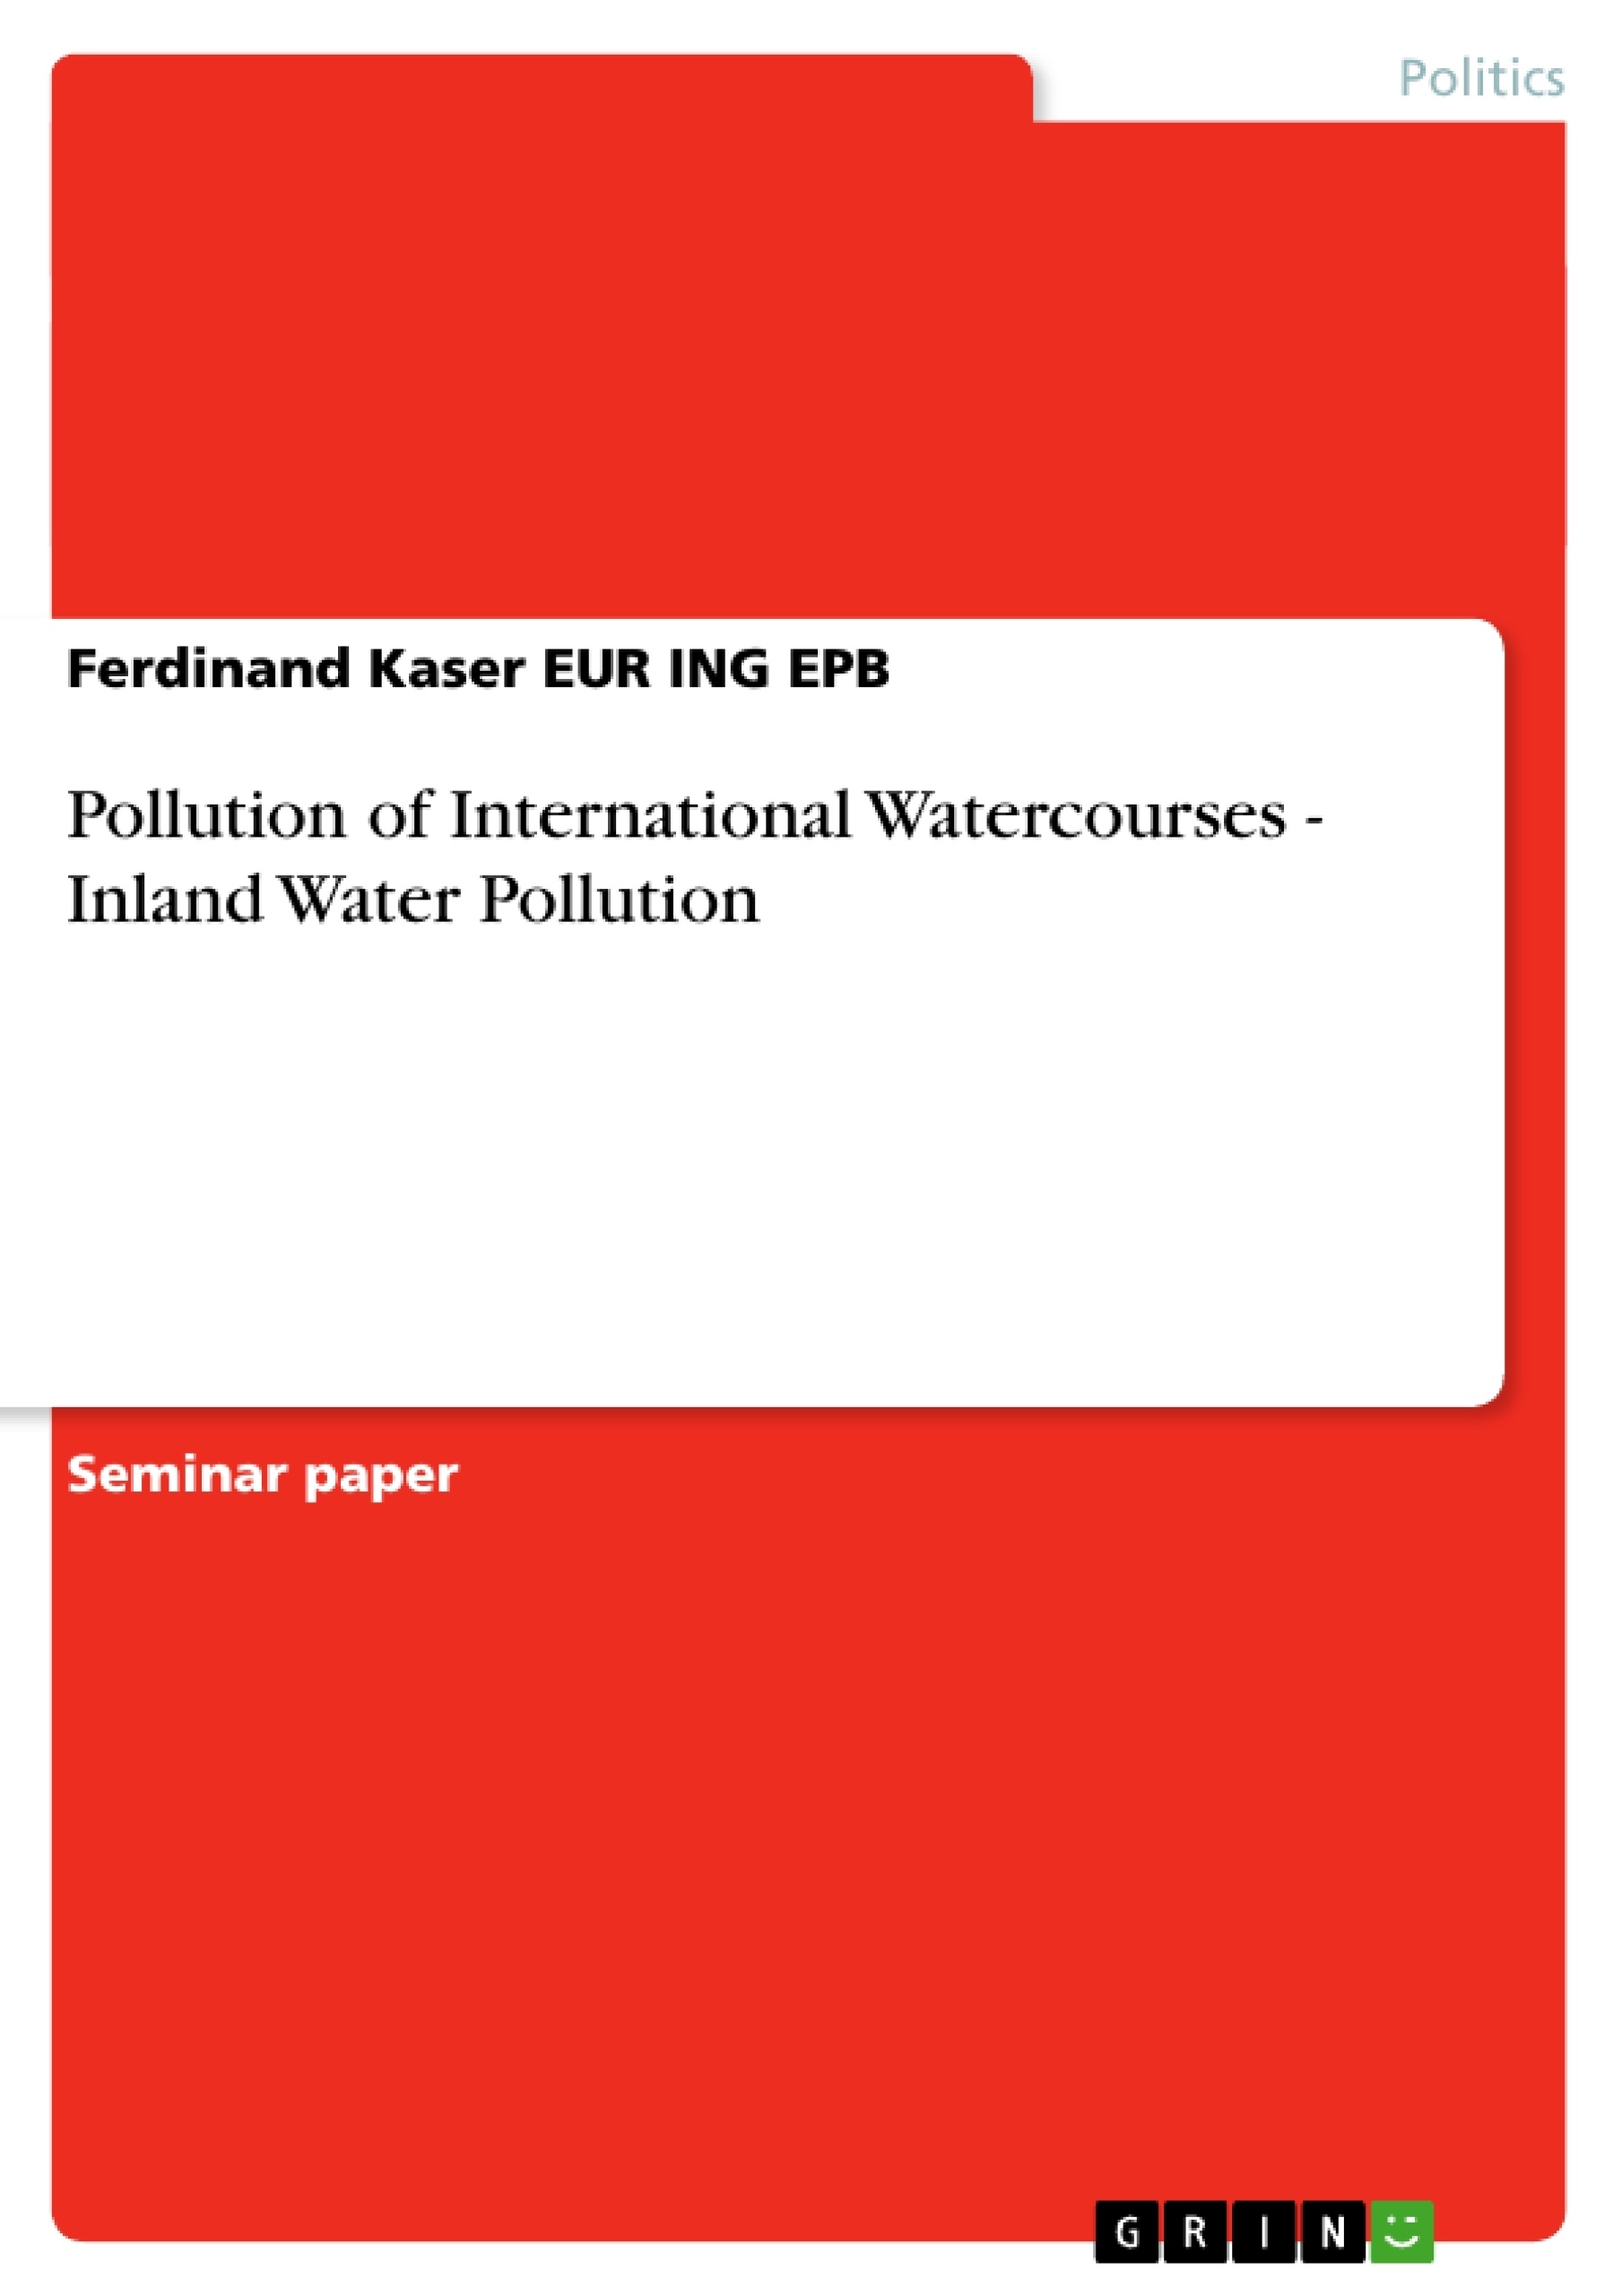 Title: Pollution of International Watercourses - Inland Water Pollution